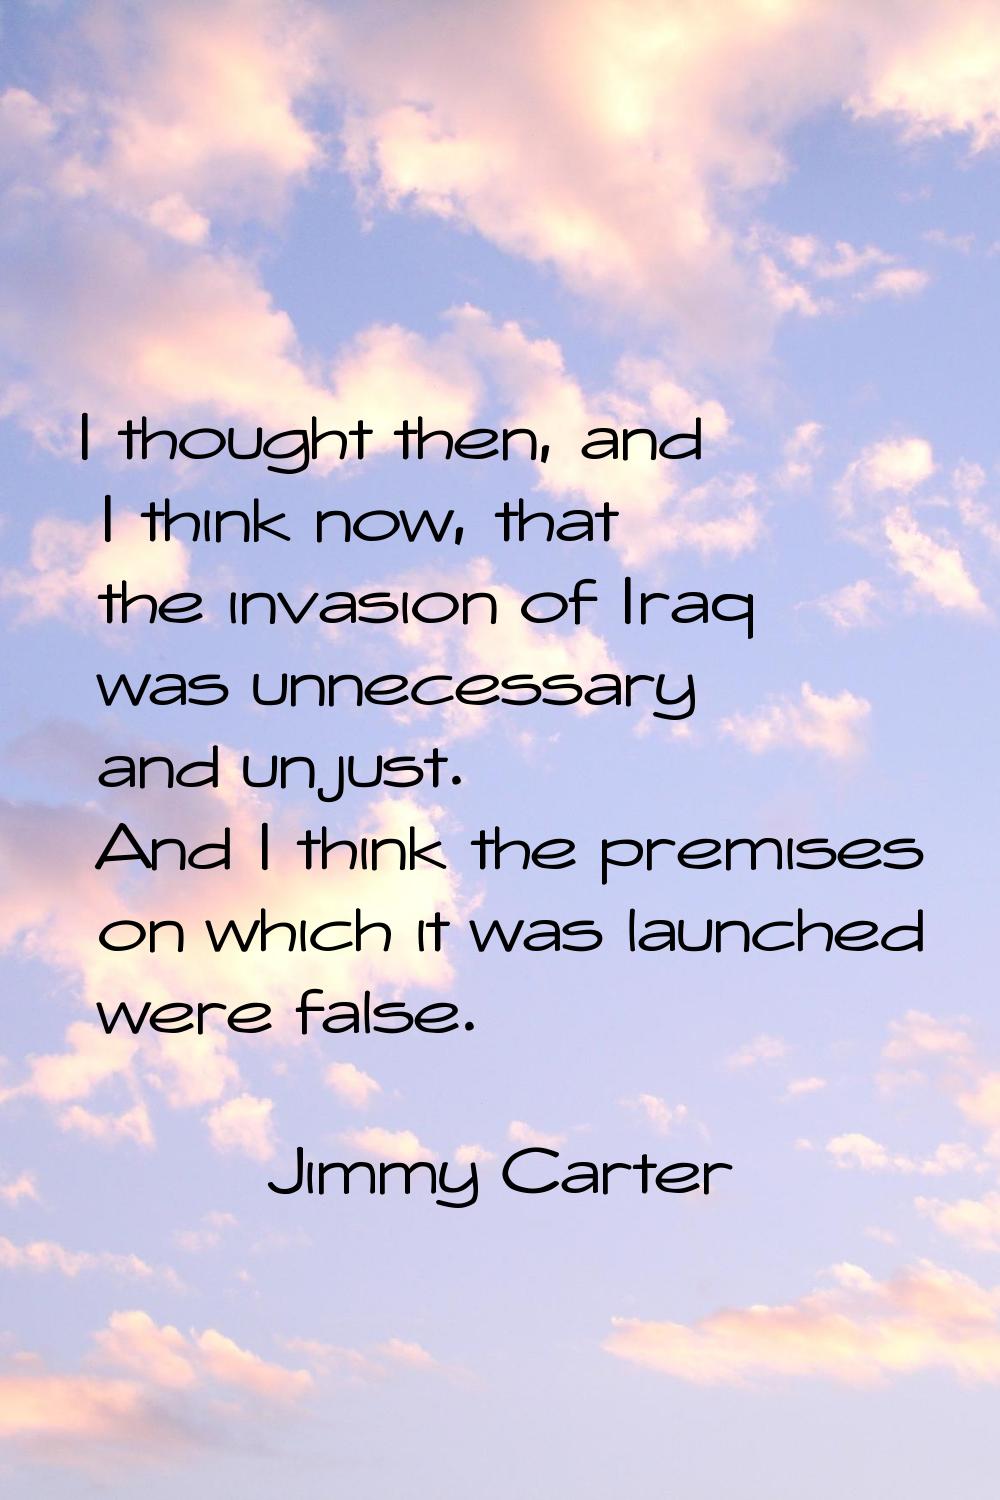 I thought then, and I think now, that the invasion of Iraq was unnecessary and unjust. And I think 